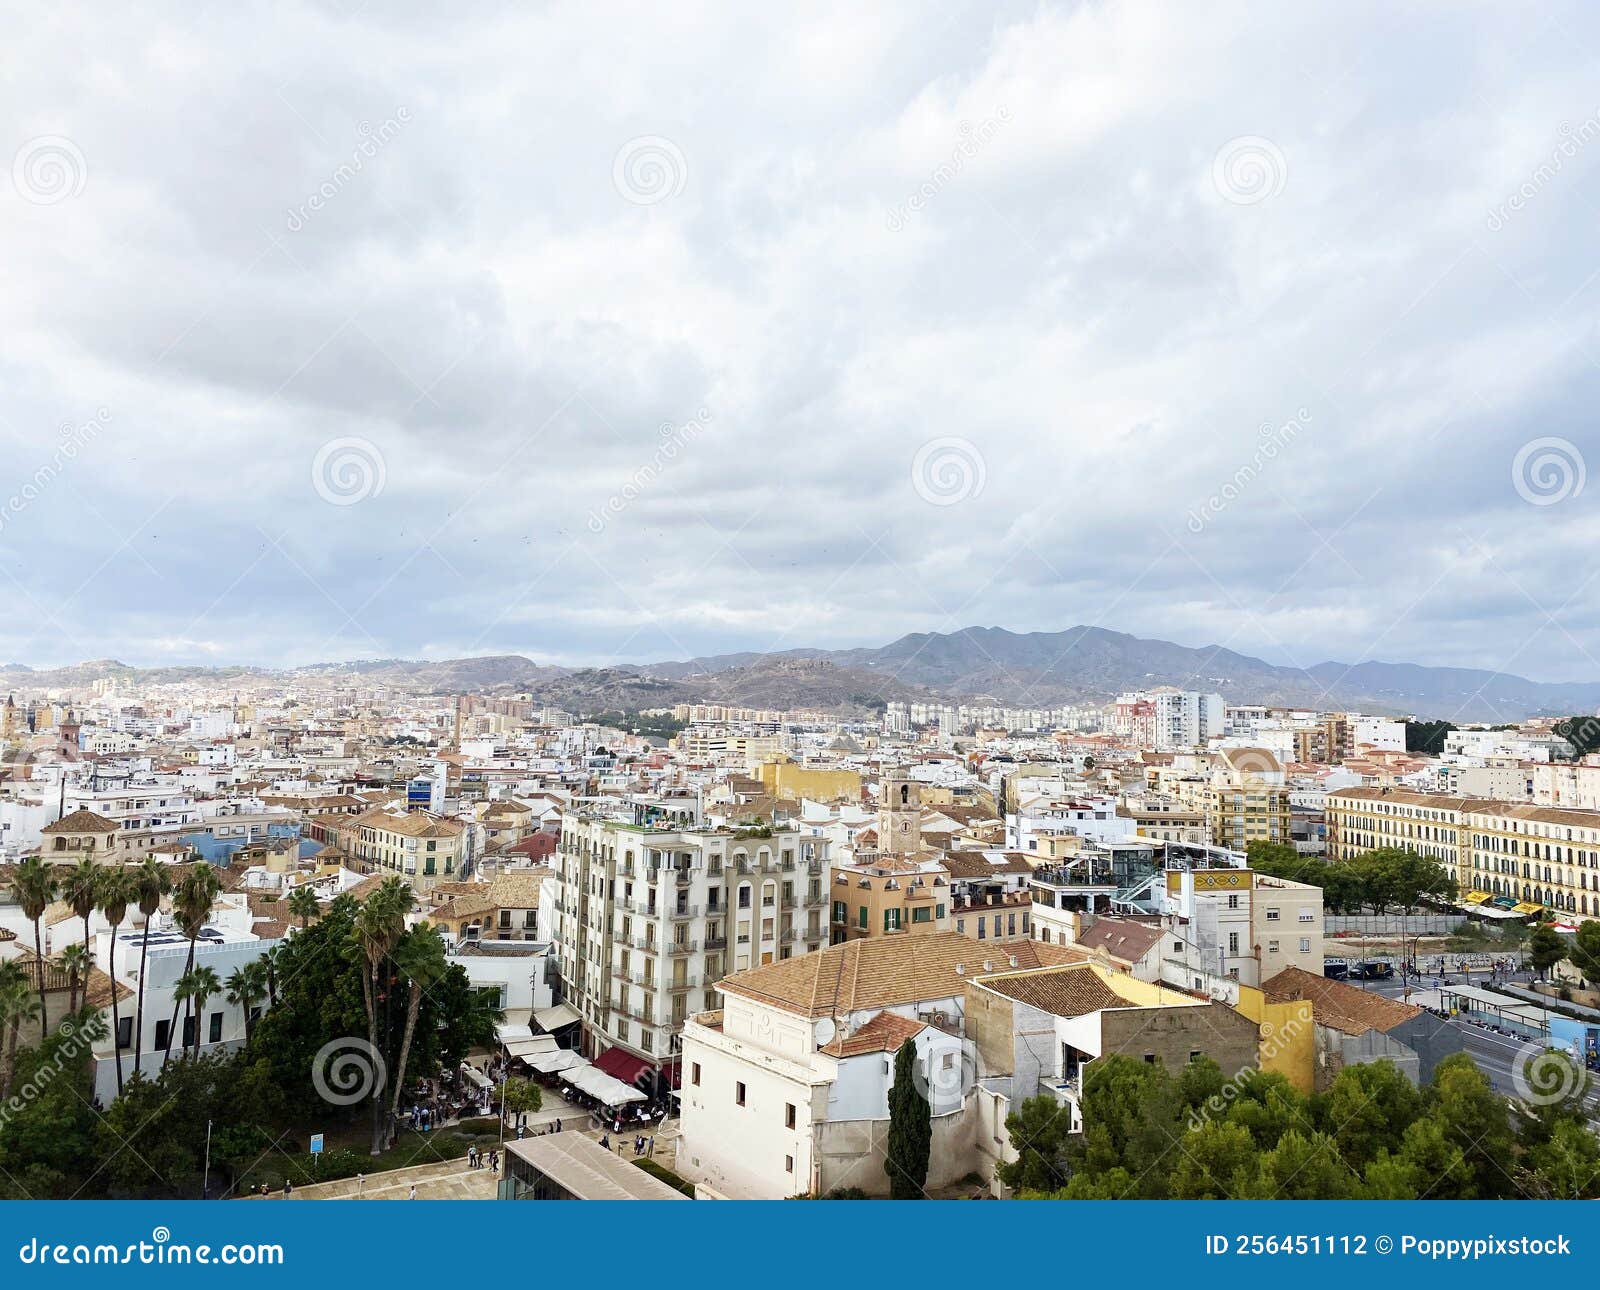 high angle view of the city from alcazaba de malaga on a cloudy day. one of the most famous attractions in malaga, spain